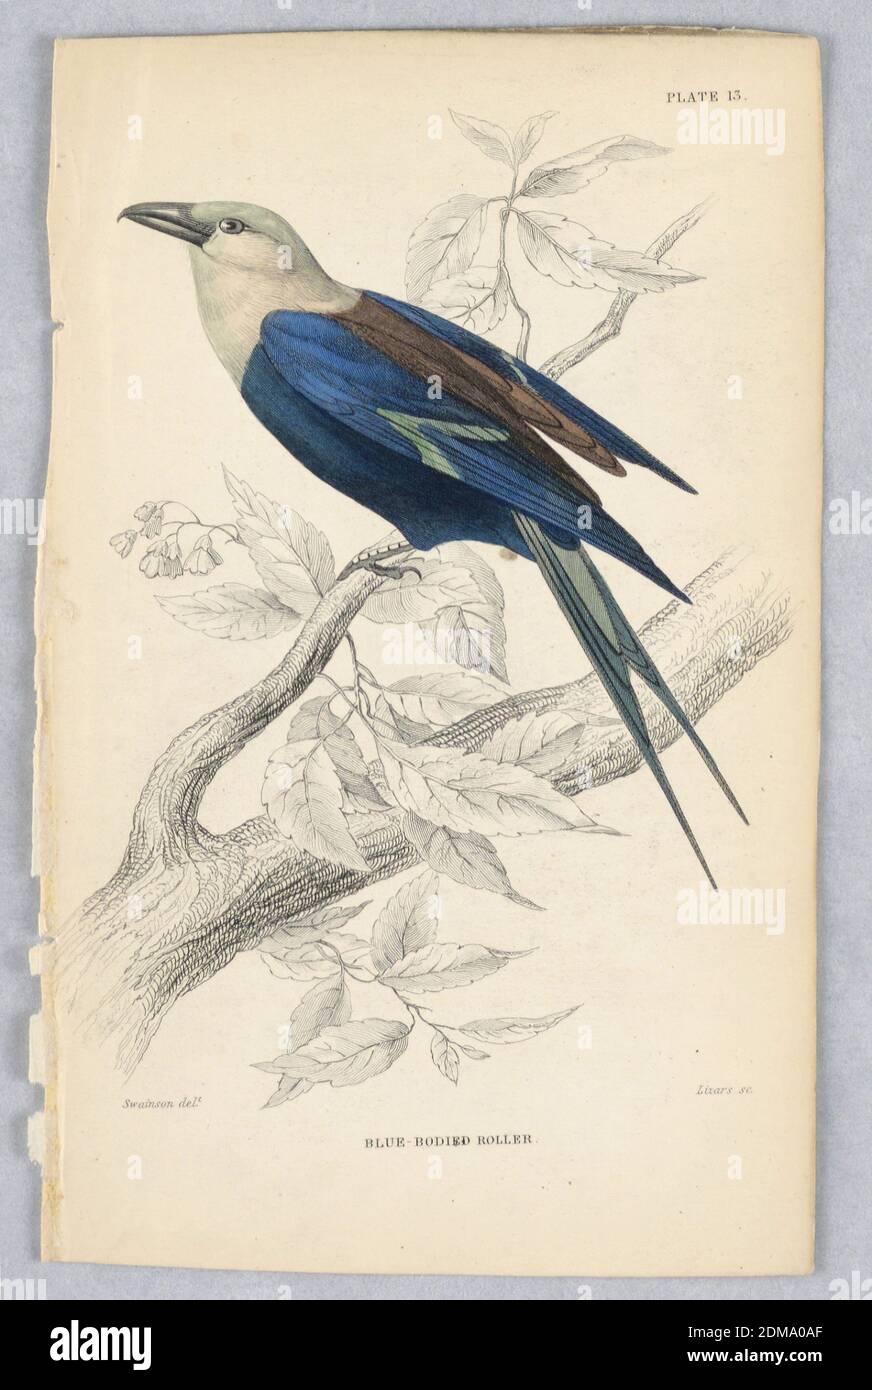 Blue-Bodied Roller, Plate 13 from Birds of Western Africa, William Home Lizars, Scottish, 1788 - 1859, William Swainson, British, 1789 - 1855, Engraving, brush and watercolor on paper, White-headed bird in a flowering tree branch. He has a blue body and wings, a brown back, and a green tail; green wing bars. Title and artists' names below., Edinburgh, Scotland, 1837, Print Stock Photo